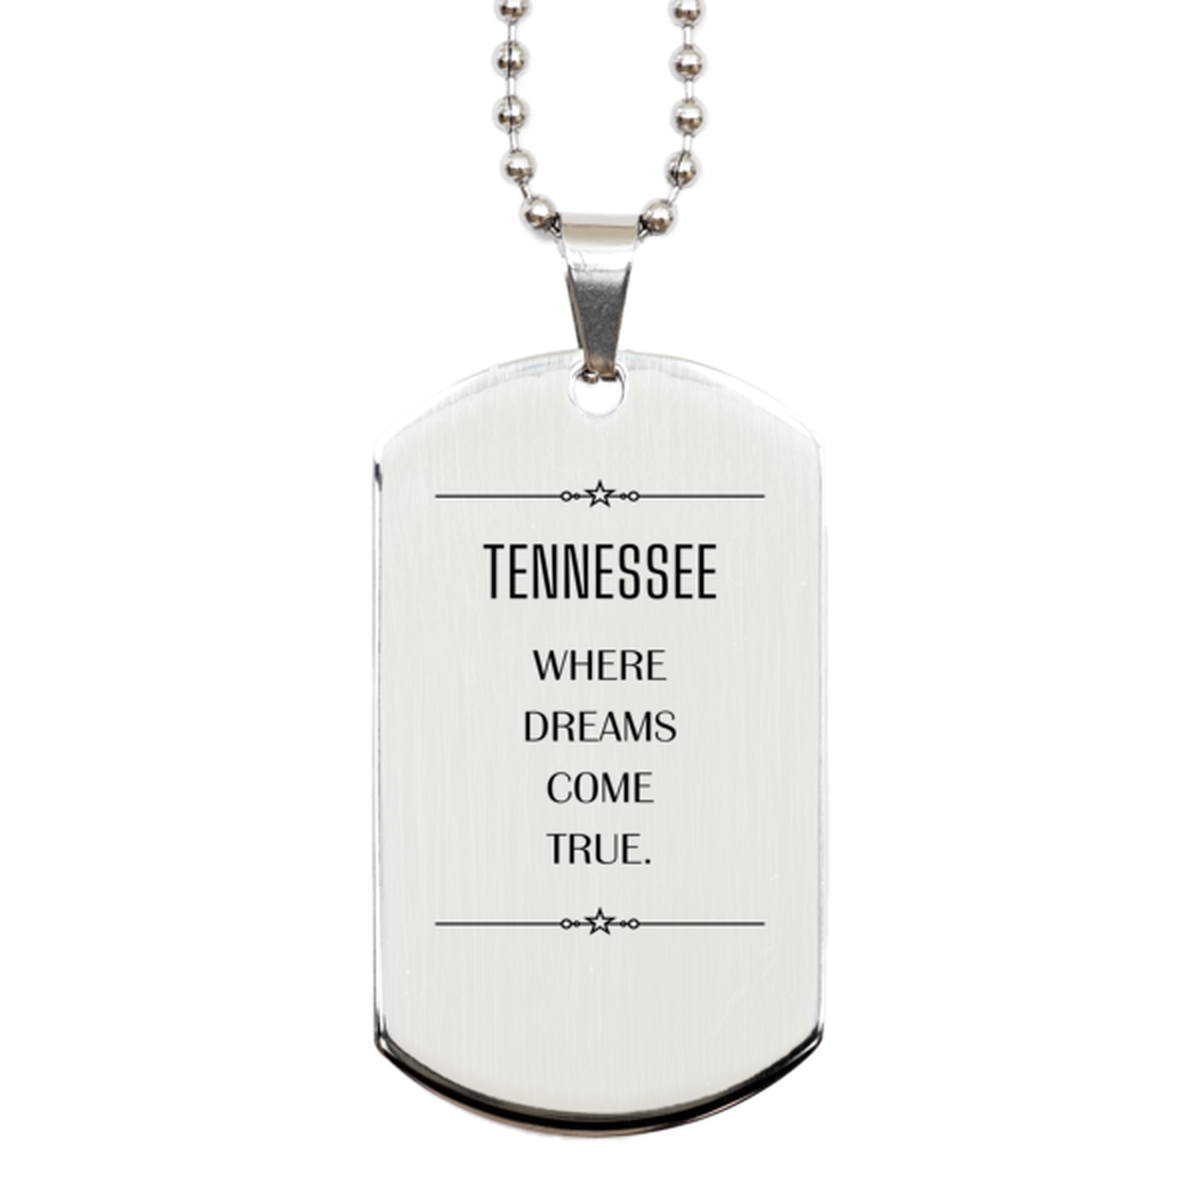 Love Tennessee State Silver Dog Tag, Tennessee Where dreams come true, Birthday Inspirational Gifts For Tennessee Men, Women, Friends